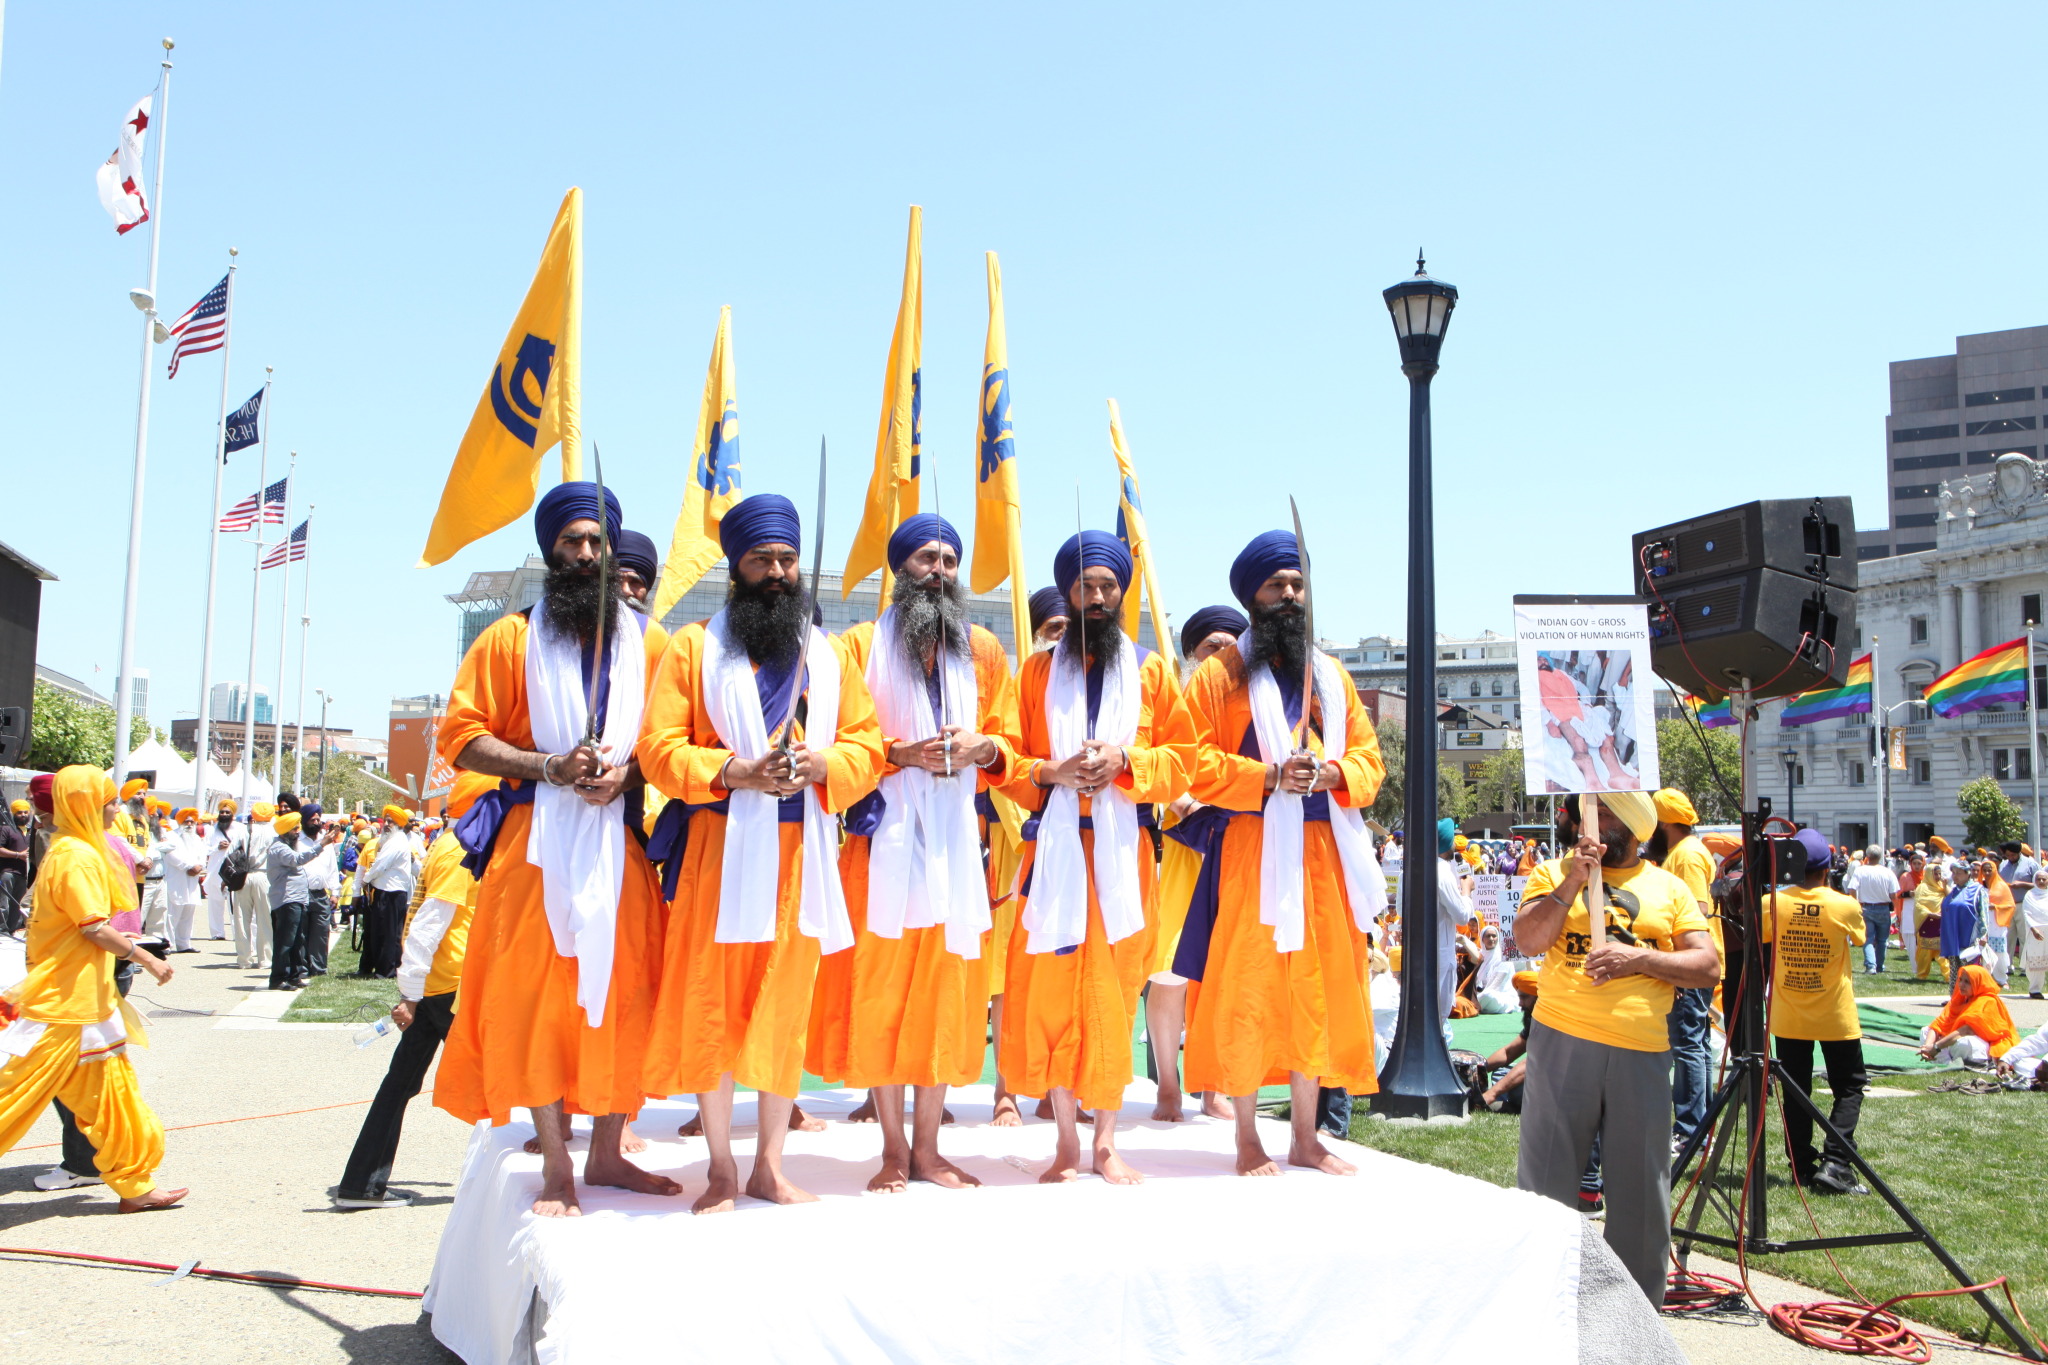 Sikh Freedom Rally at Civic Center Plaza Fulton Plaza in San